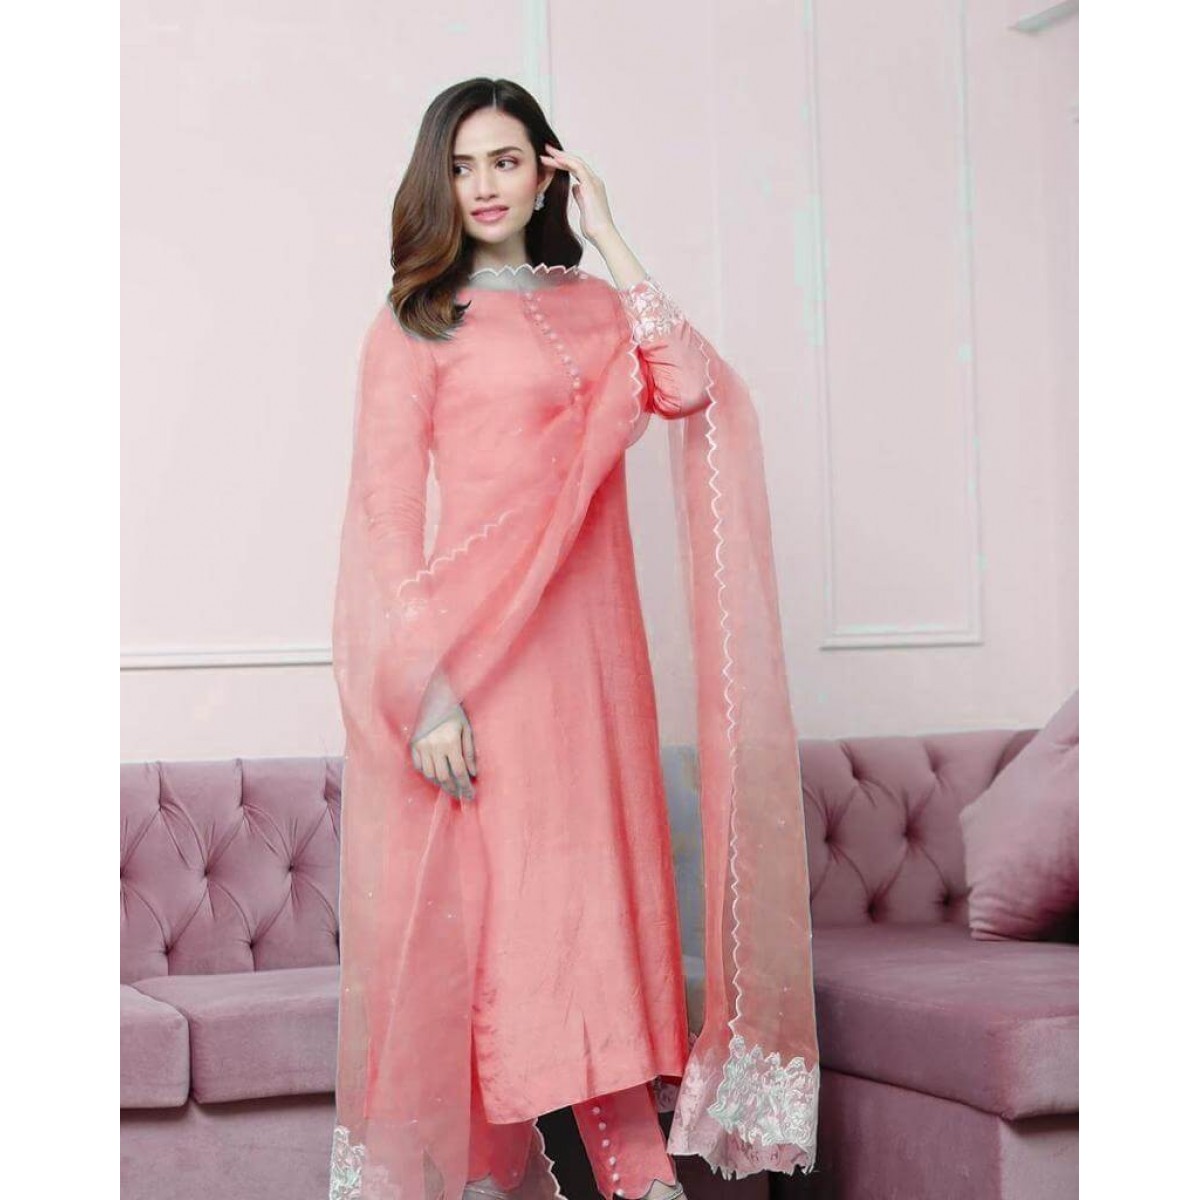 Latest 50 Bollywood Cotton Salwar Suit Designs 2022 - Tips and Beauty |  Dress indian style, Bollywood style dress, Stylish dresses